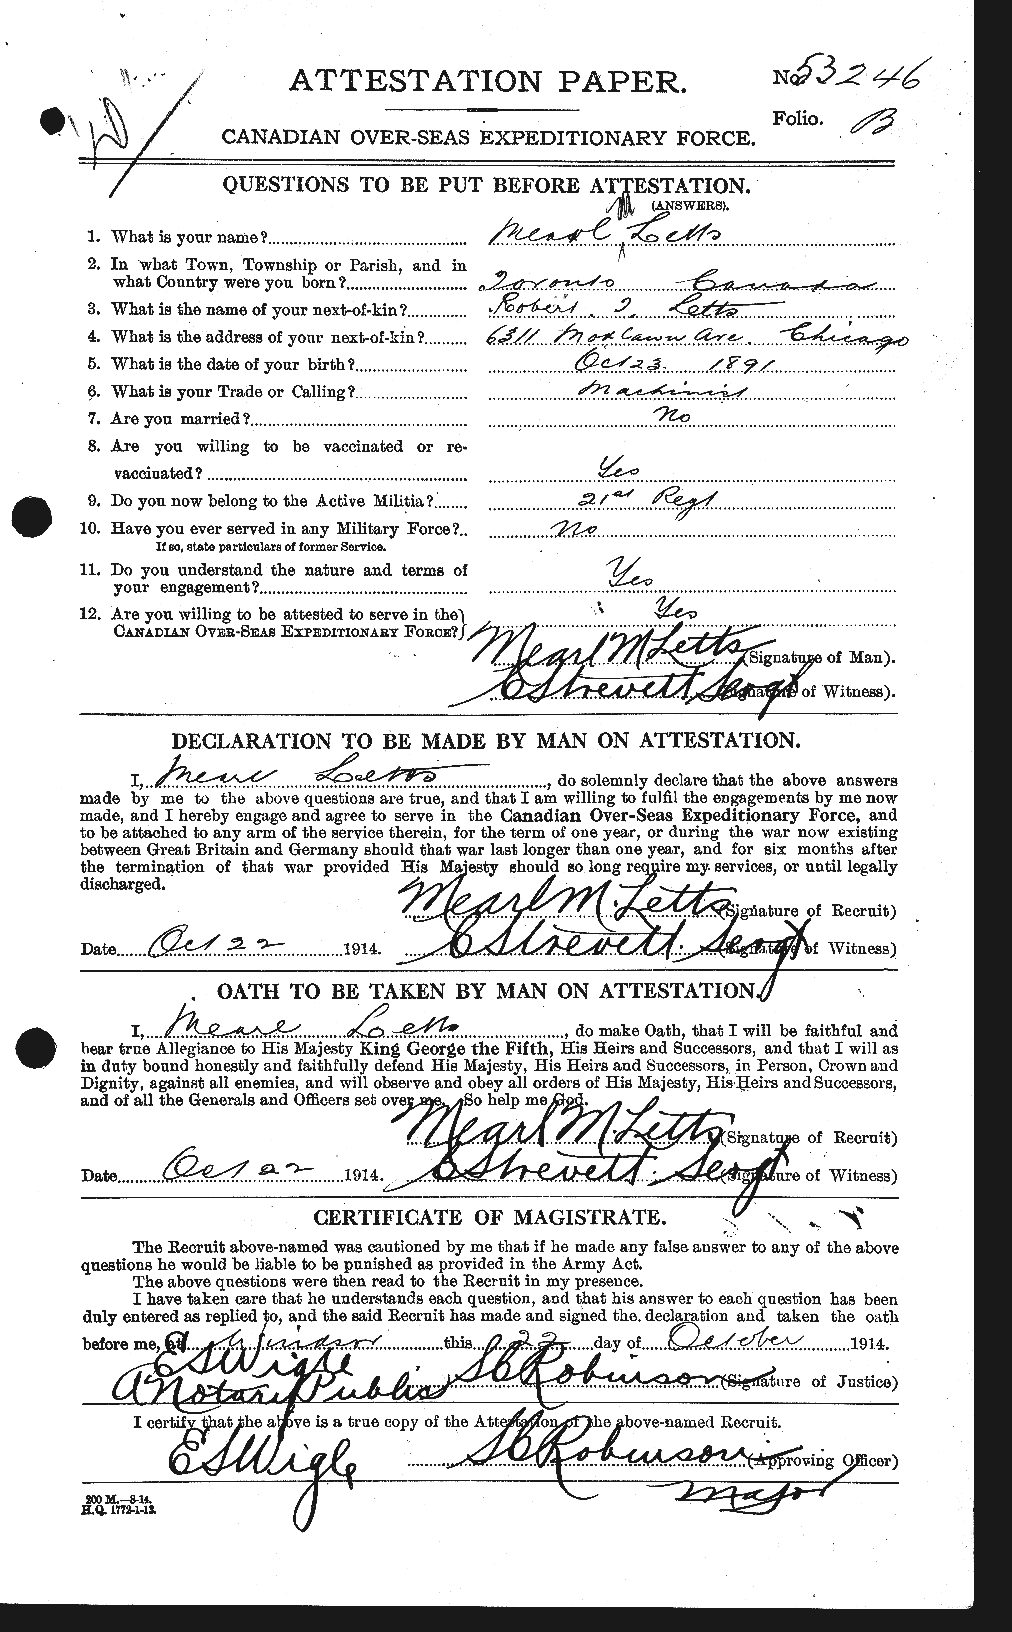 Personnel Records of the First World War - CEF 463512a